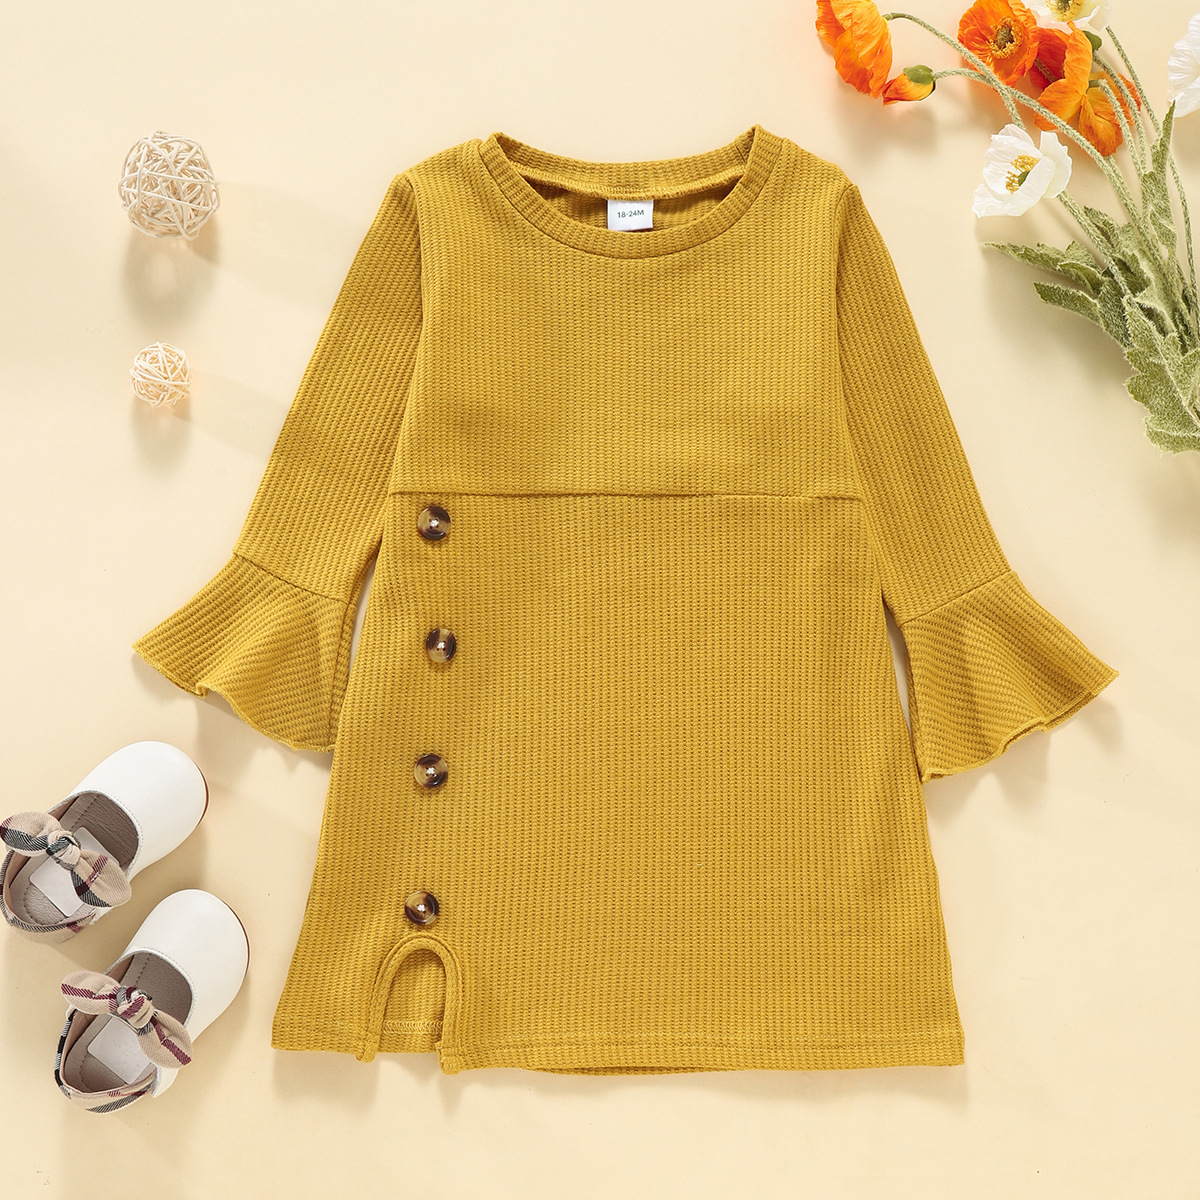 2022 New Cross-border Foreign Trade Little Girls' Clothing Dresses Spring And Autumn Girls' Bell-sleeved Dresses European And American Trends